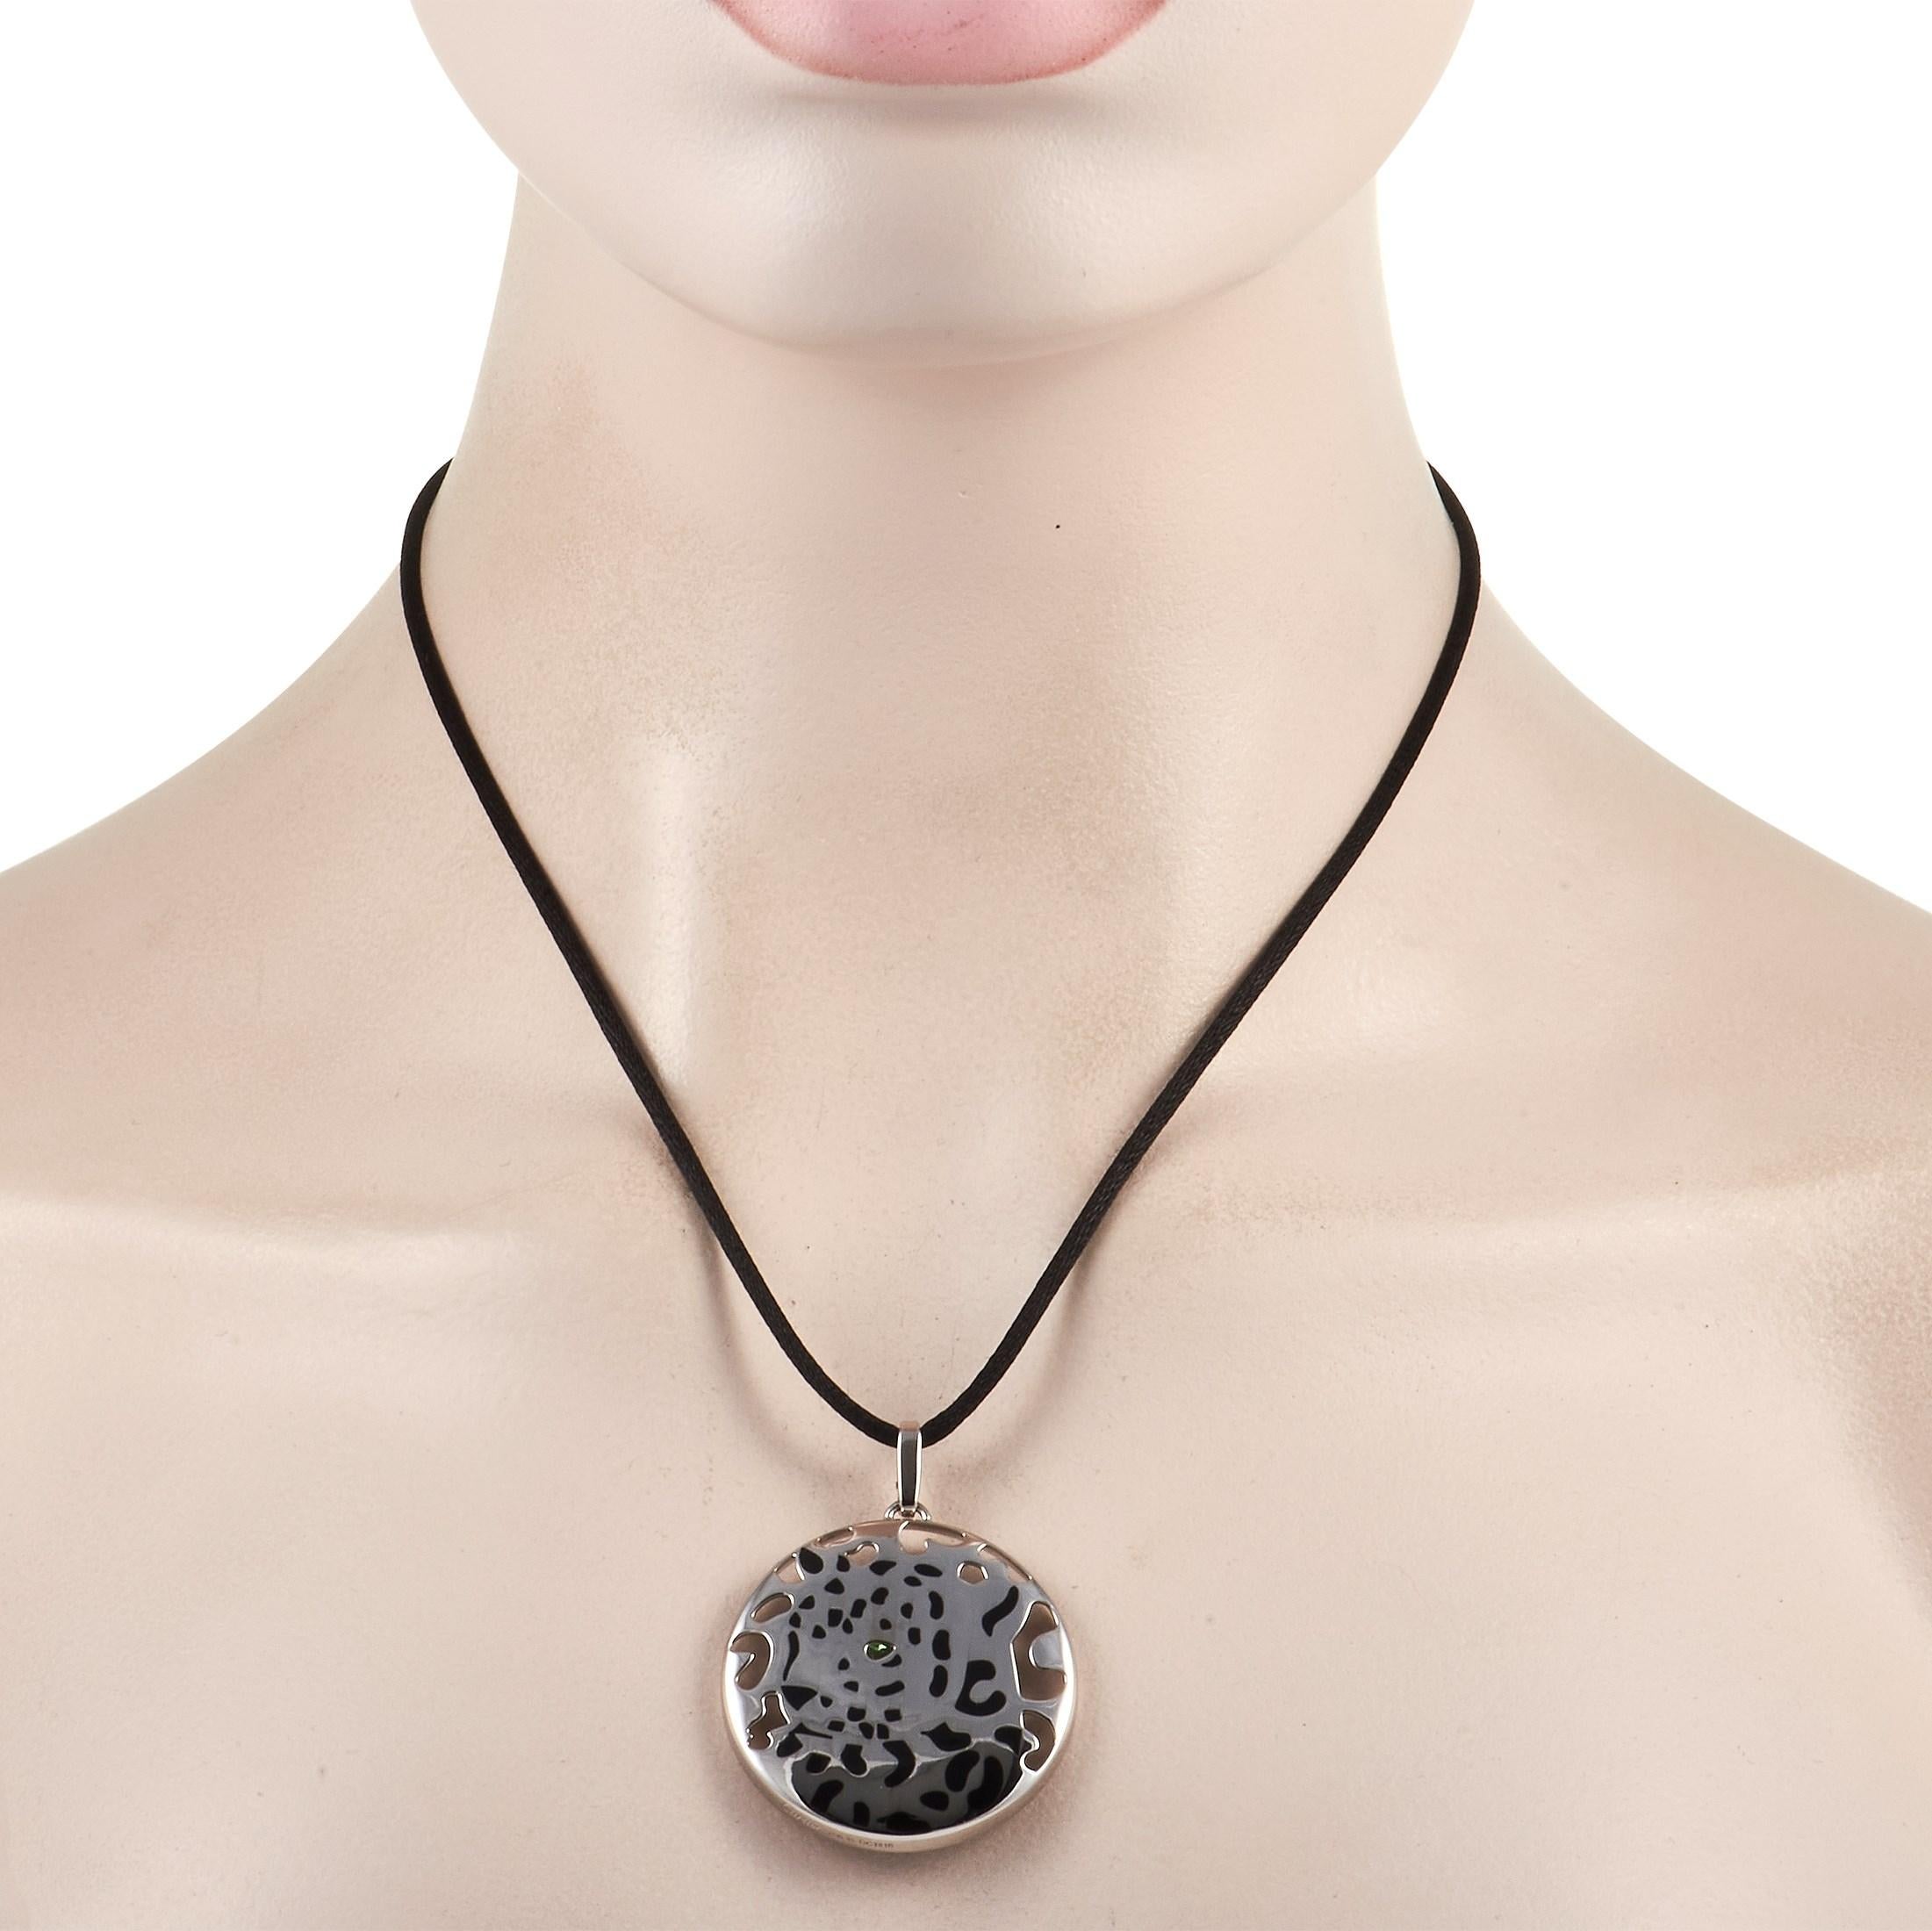 Possess the courage of a panther as you wear this iconic Cartier necklace. The Cartier 18K White Gold Panthere Medallion Necklace features a round medallion cut-out with a panther silhouette showing against the black onyx background. Bringing a